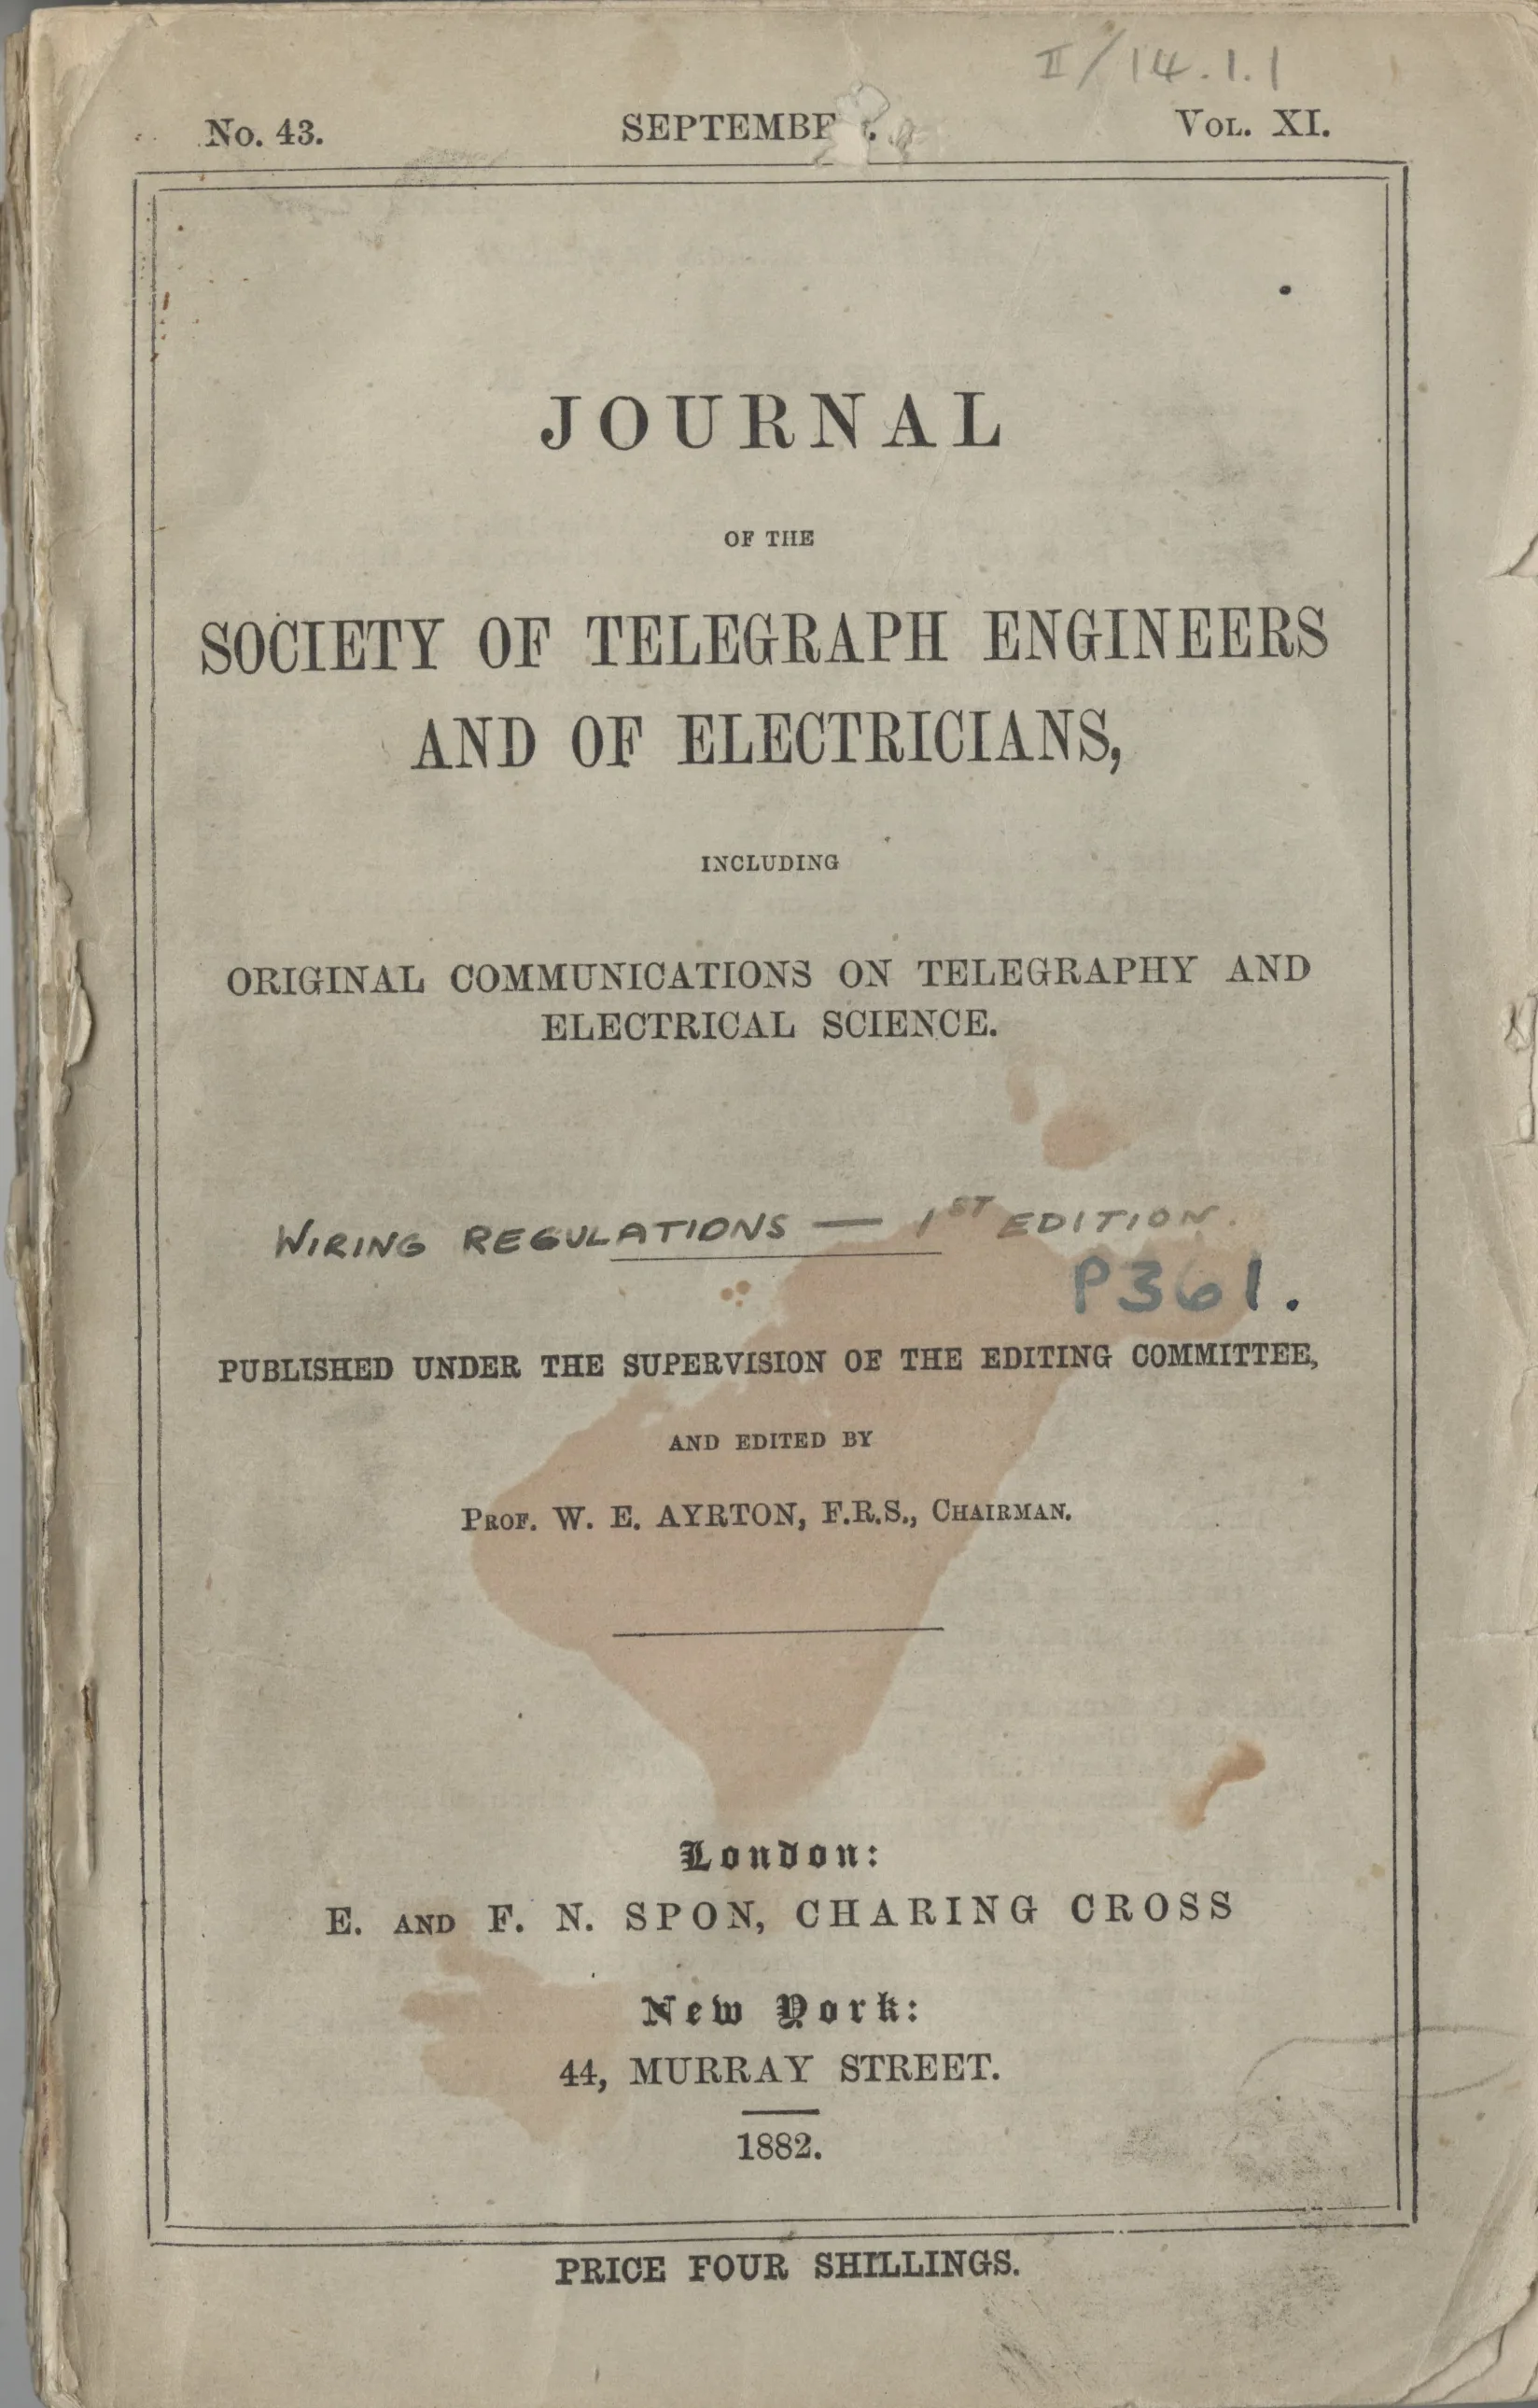 Cover of the STEE Journal that includes the first edition of the Wiring Regulations 1882